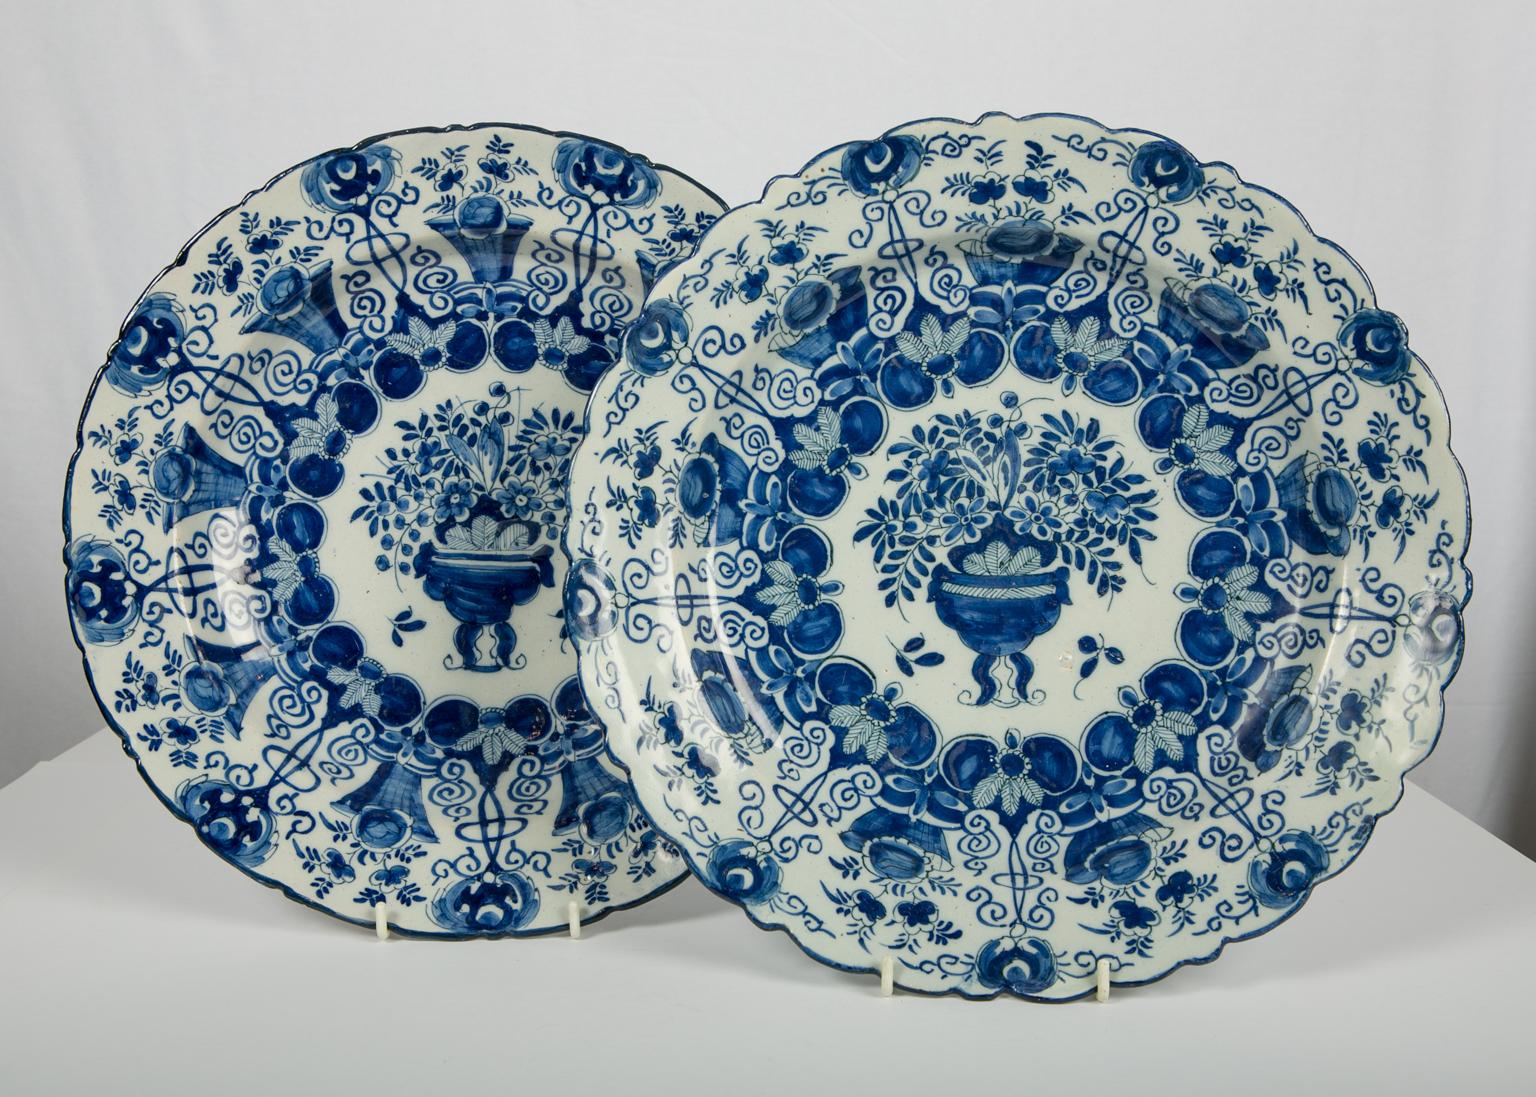 We are pleased to offer this pair of large blue and white Delft chargers made by and with the mark of 